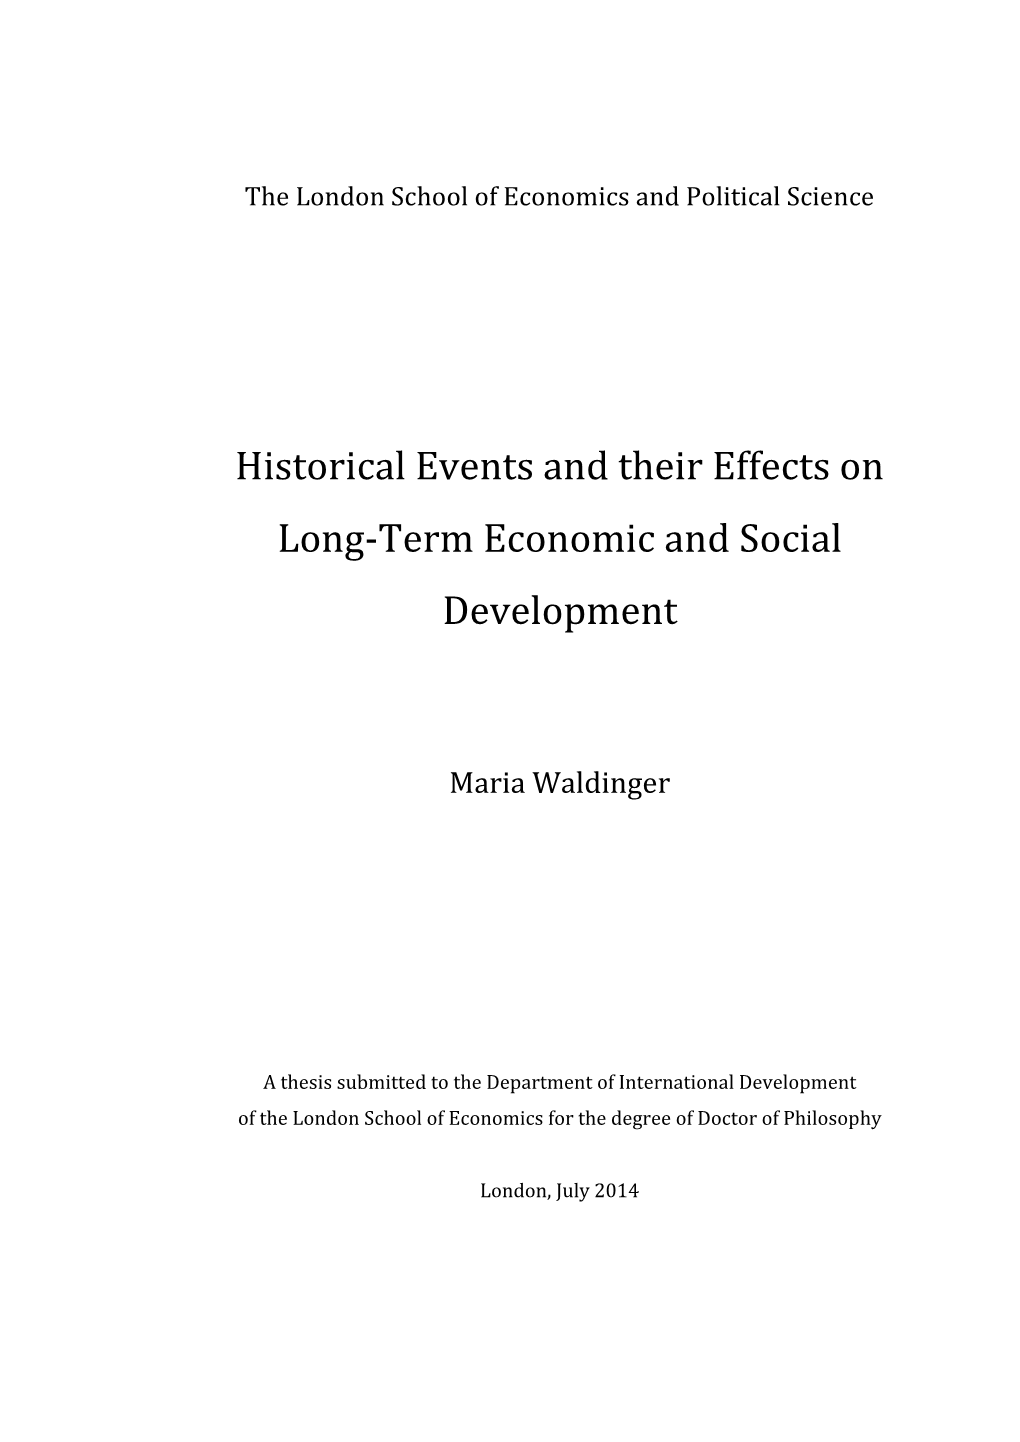 Historical Events and Their Effects on Long-Term Economic and Social Development